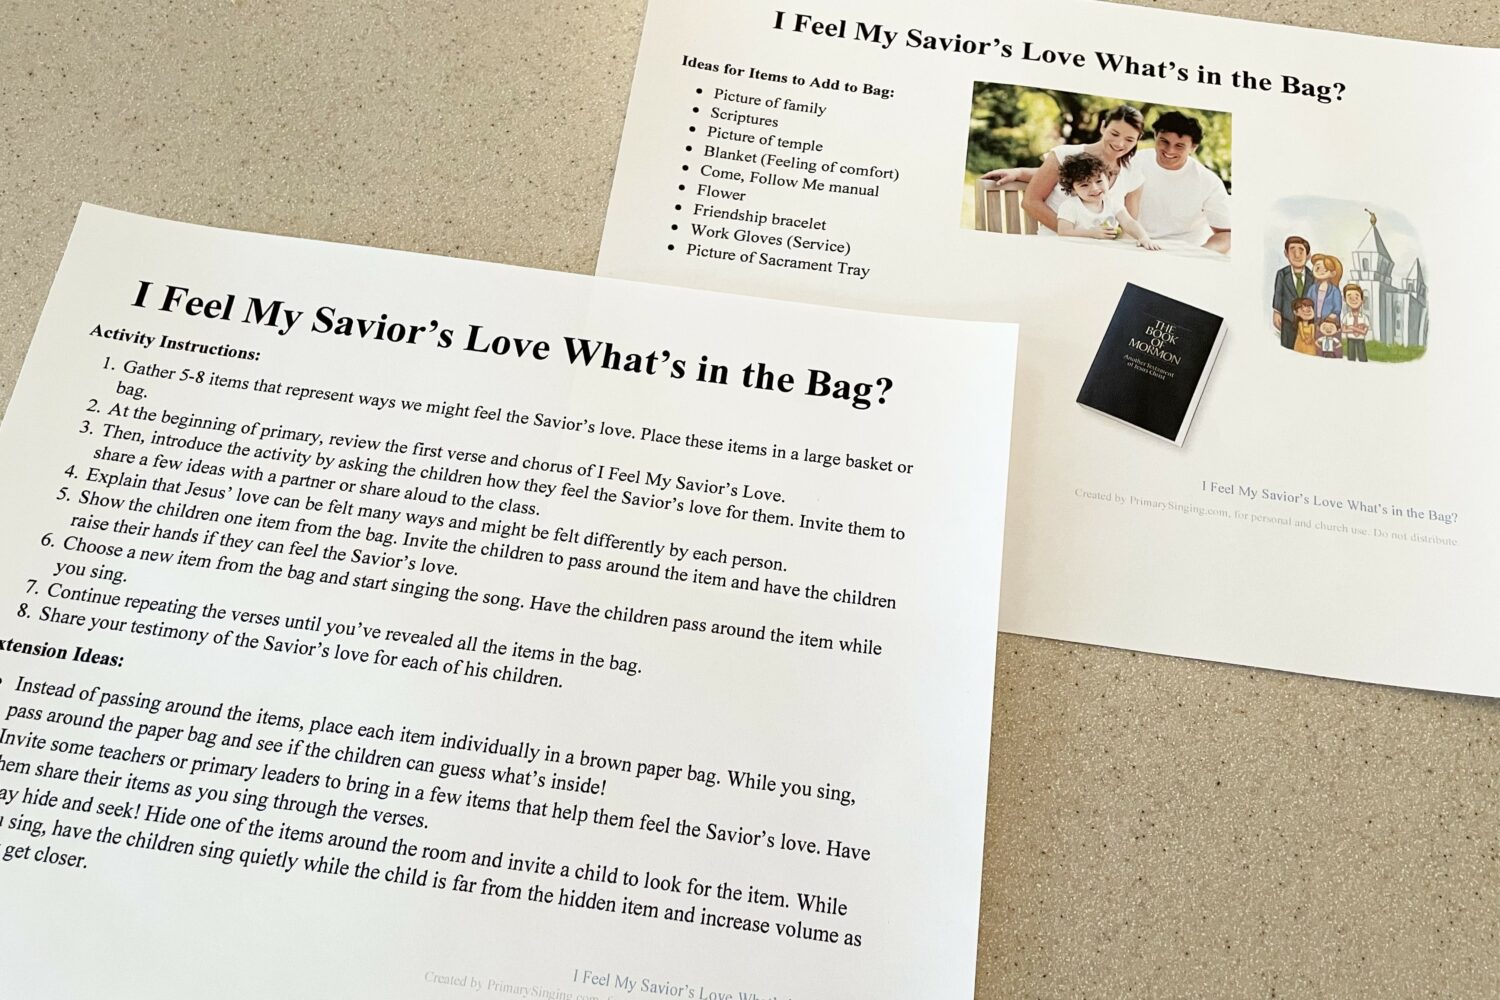 I Feel My Savior's Love What's in the Bag? Easy ideas for Music Leaders IMG 6813 e1658002527881